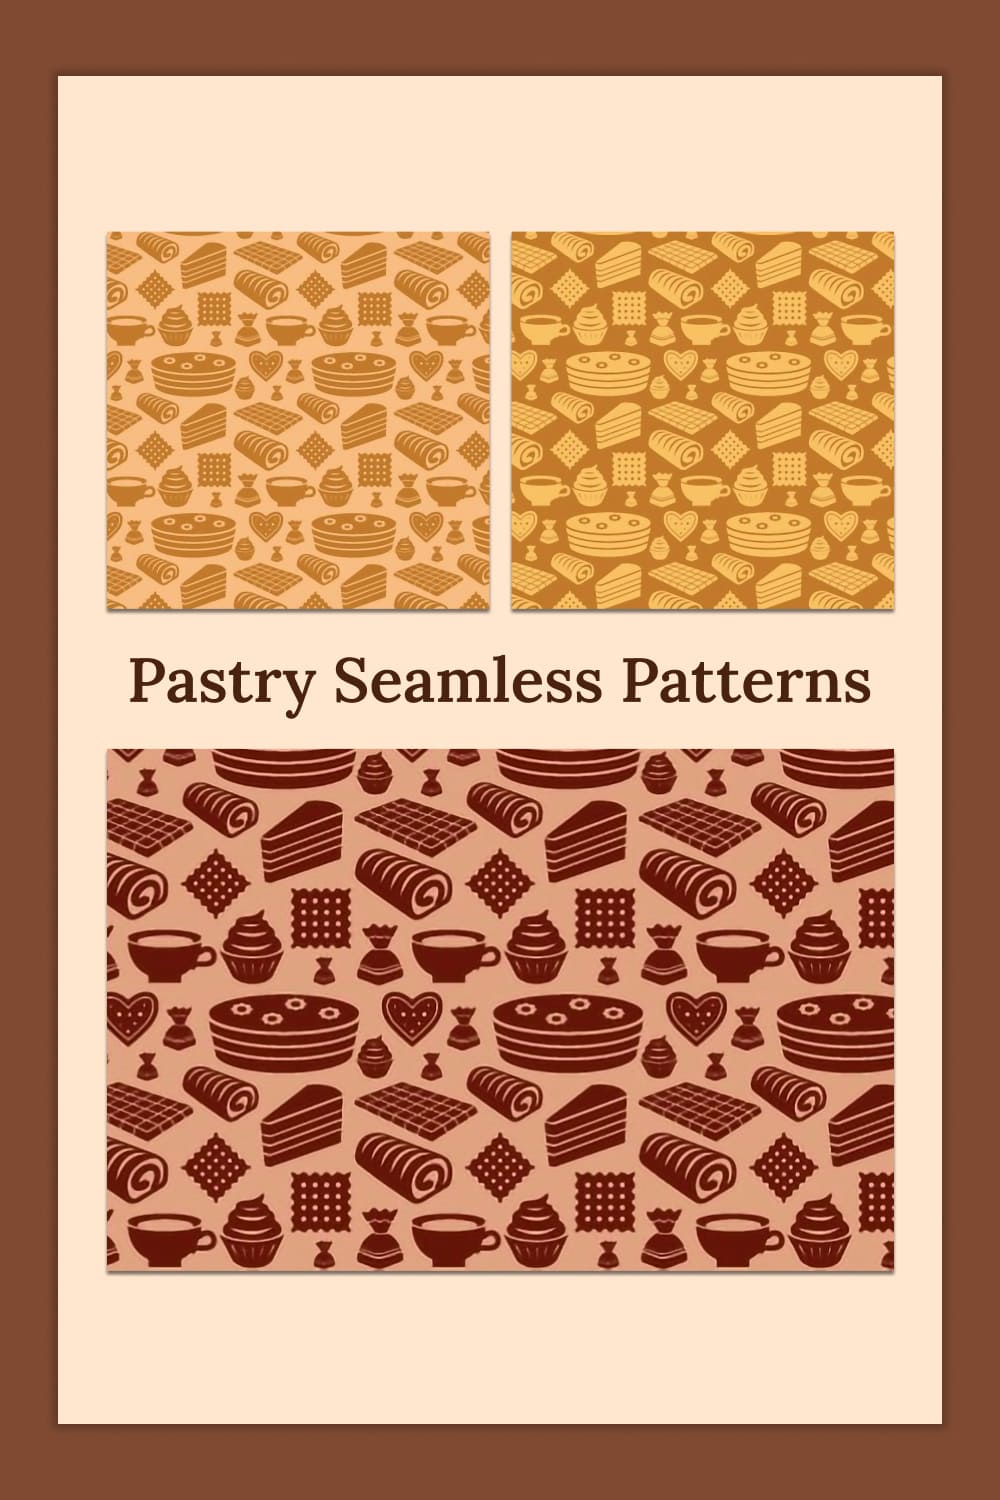 Pastry seamless patterns - pinterest image preview.